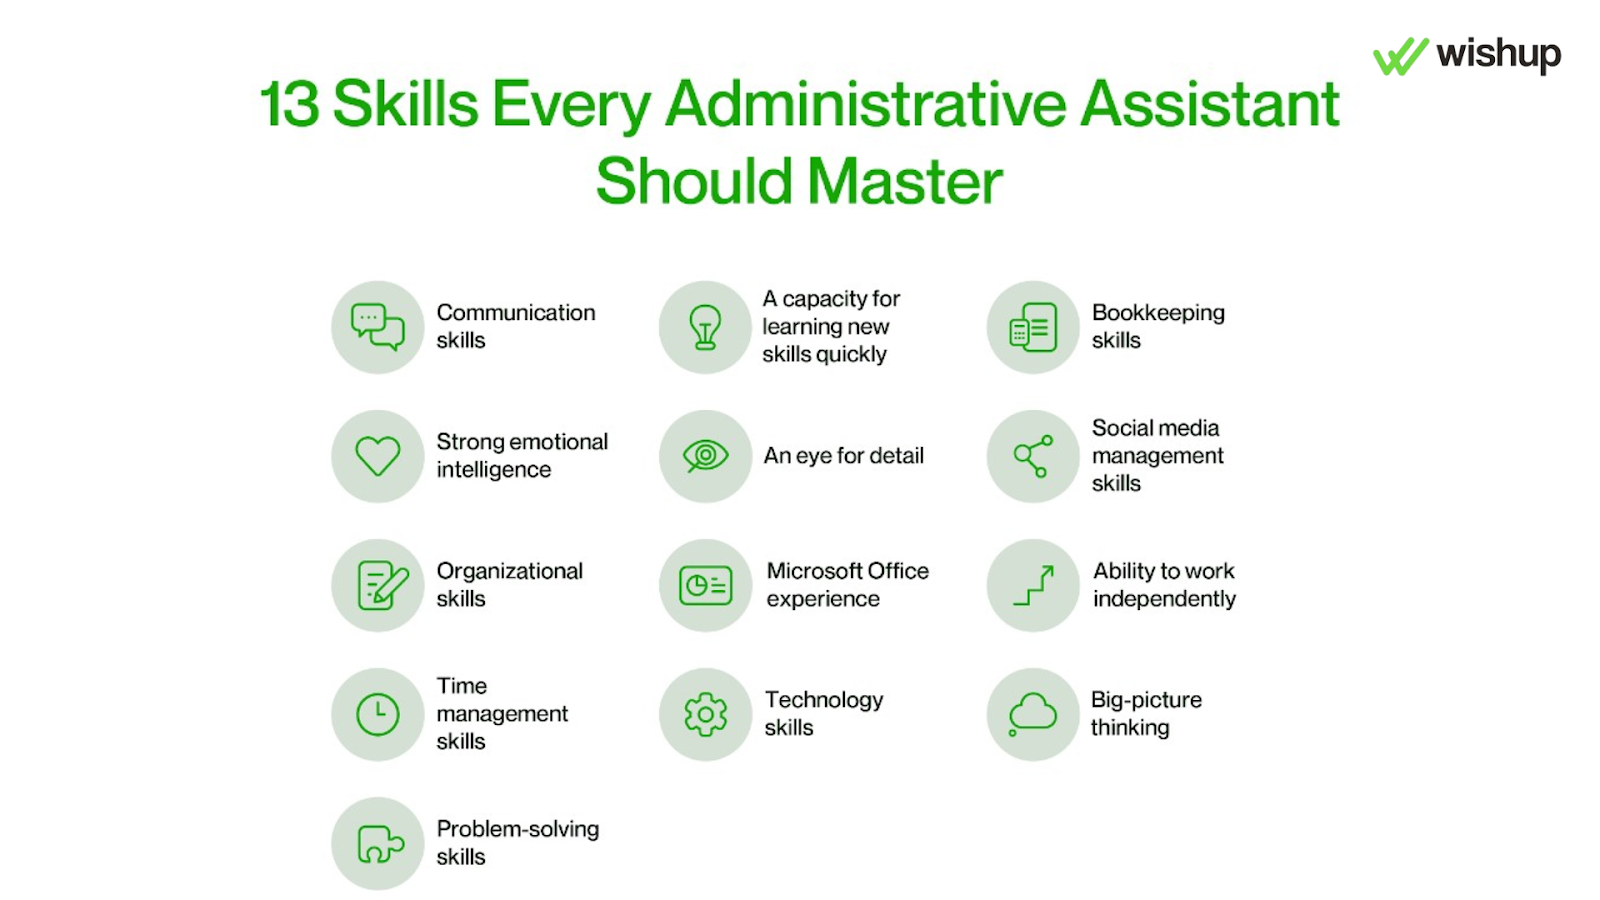 Learn about the skills an administrative assistant needs to have.